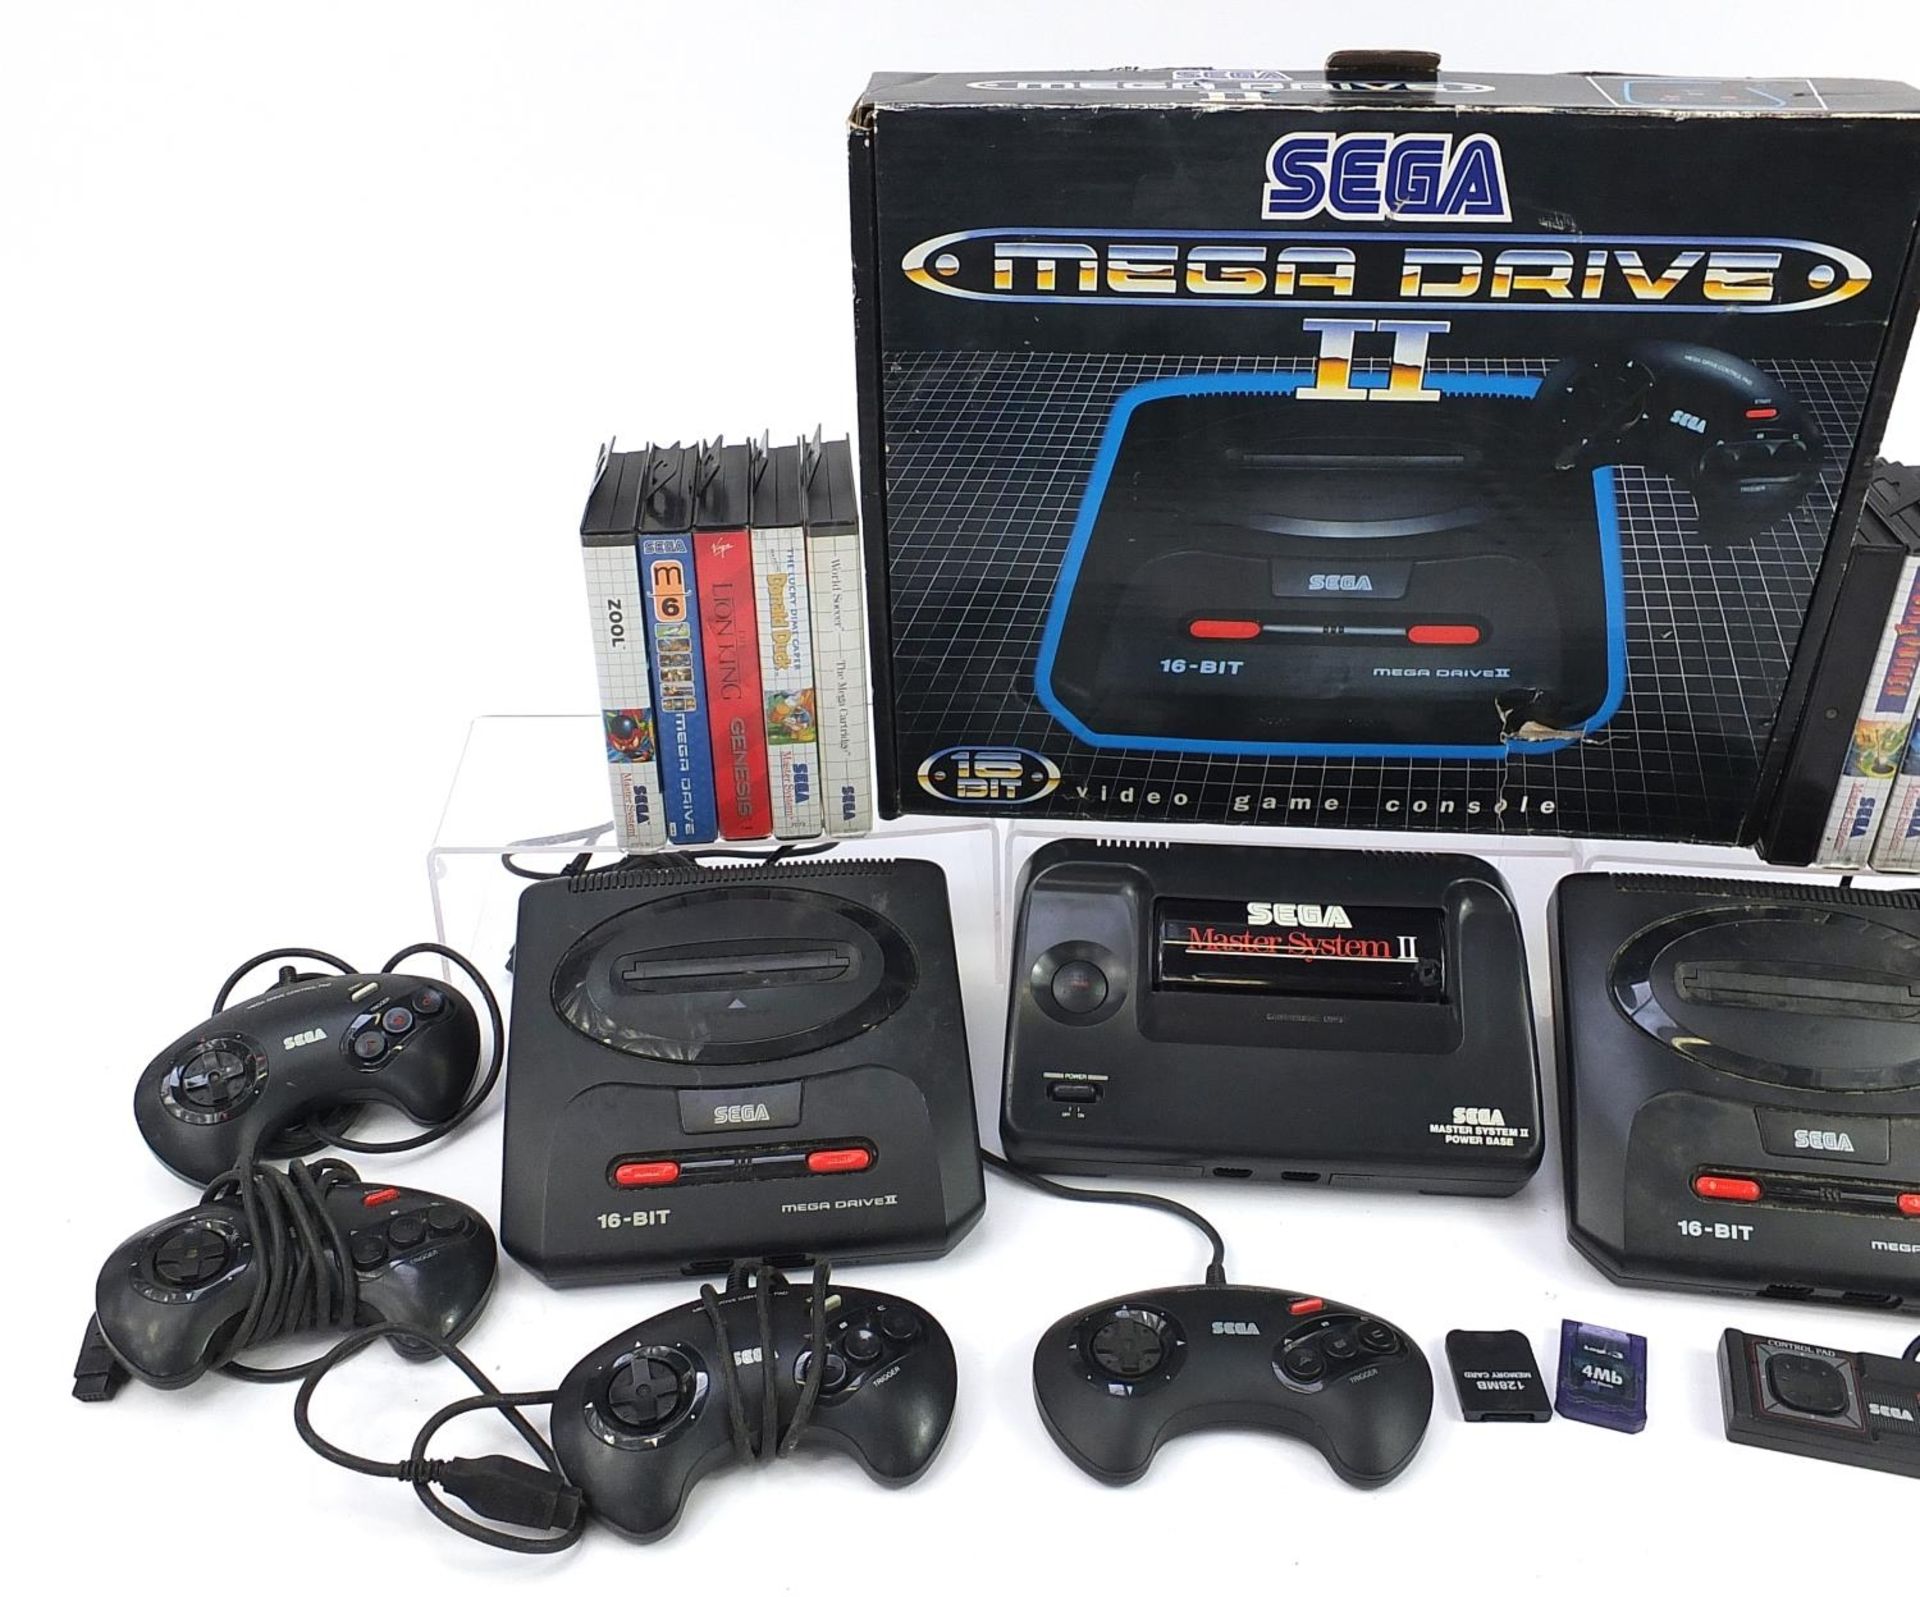 Two Sega Mega Drive II games consoles and a Sega Master System II powerbase with accessories and a - Image 2 of 3